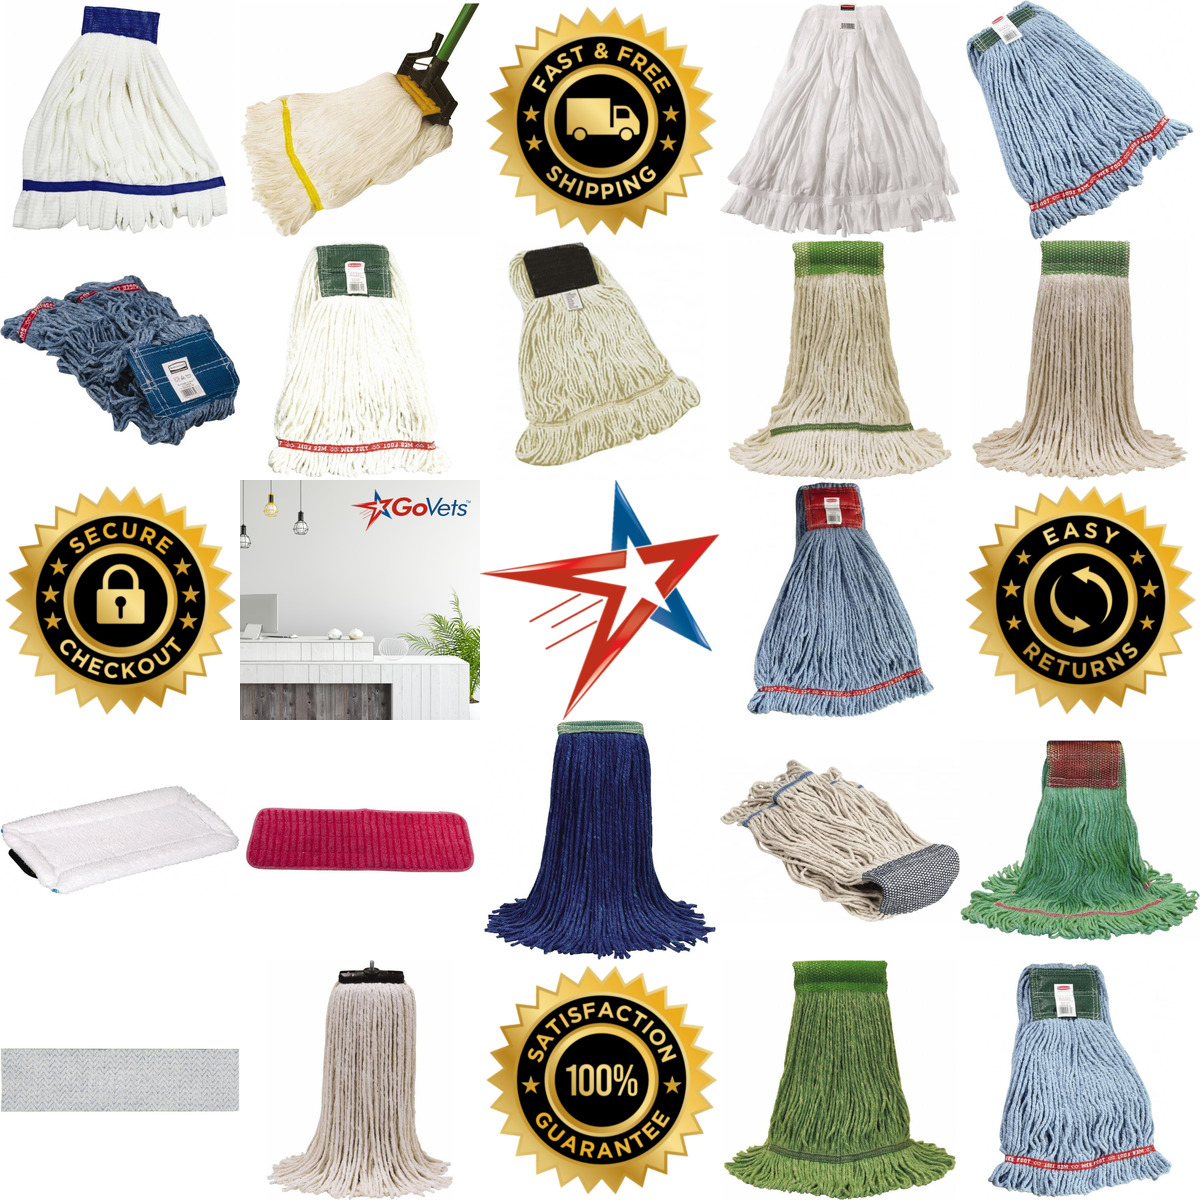 A selection of Wet Mop Heads and Pads products on GoVets